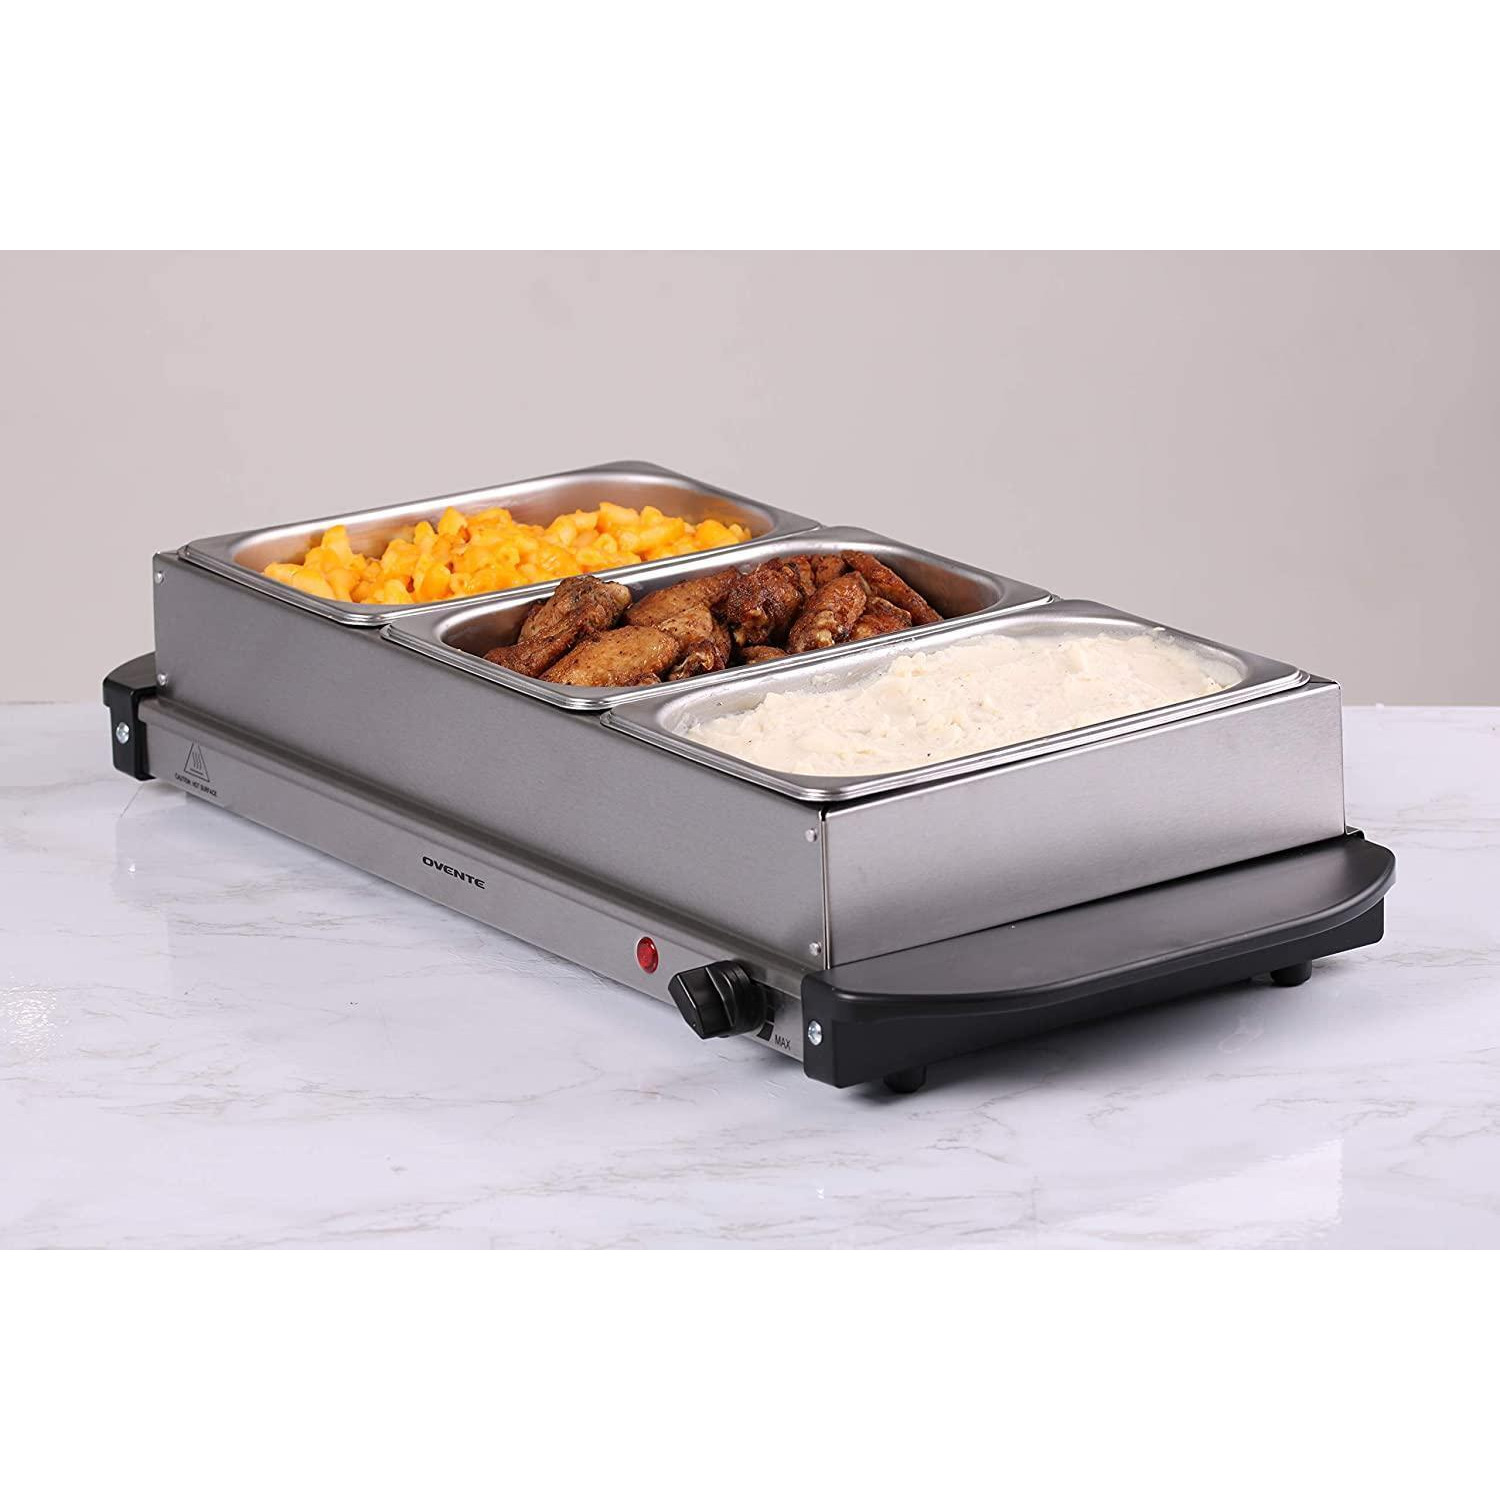 Ovente Electric Buffet Server Three Sectional Stainless Steel Food Warmer Tray